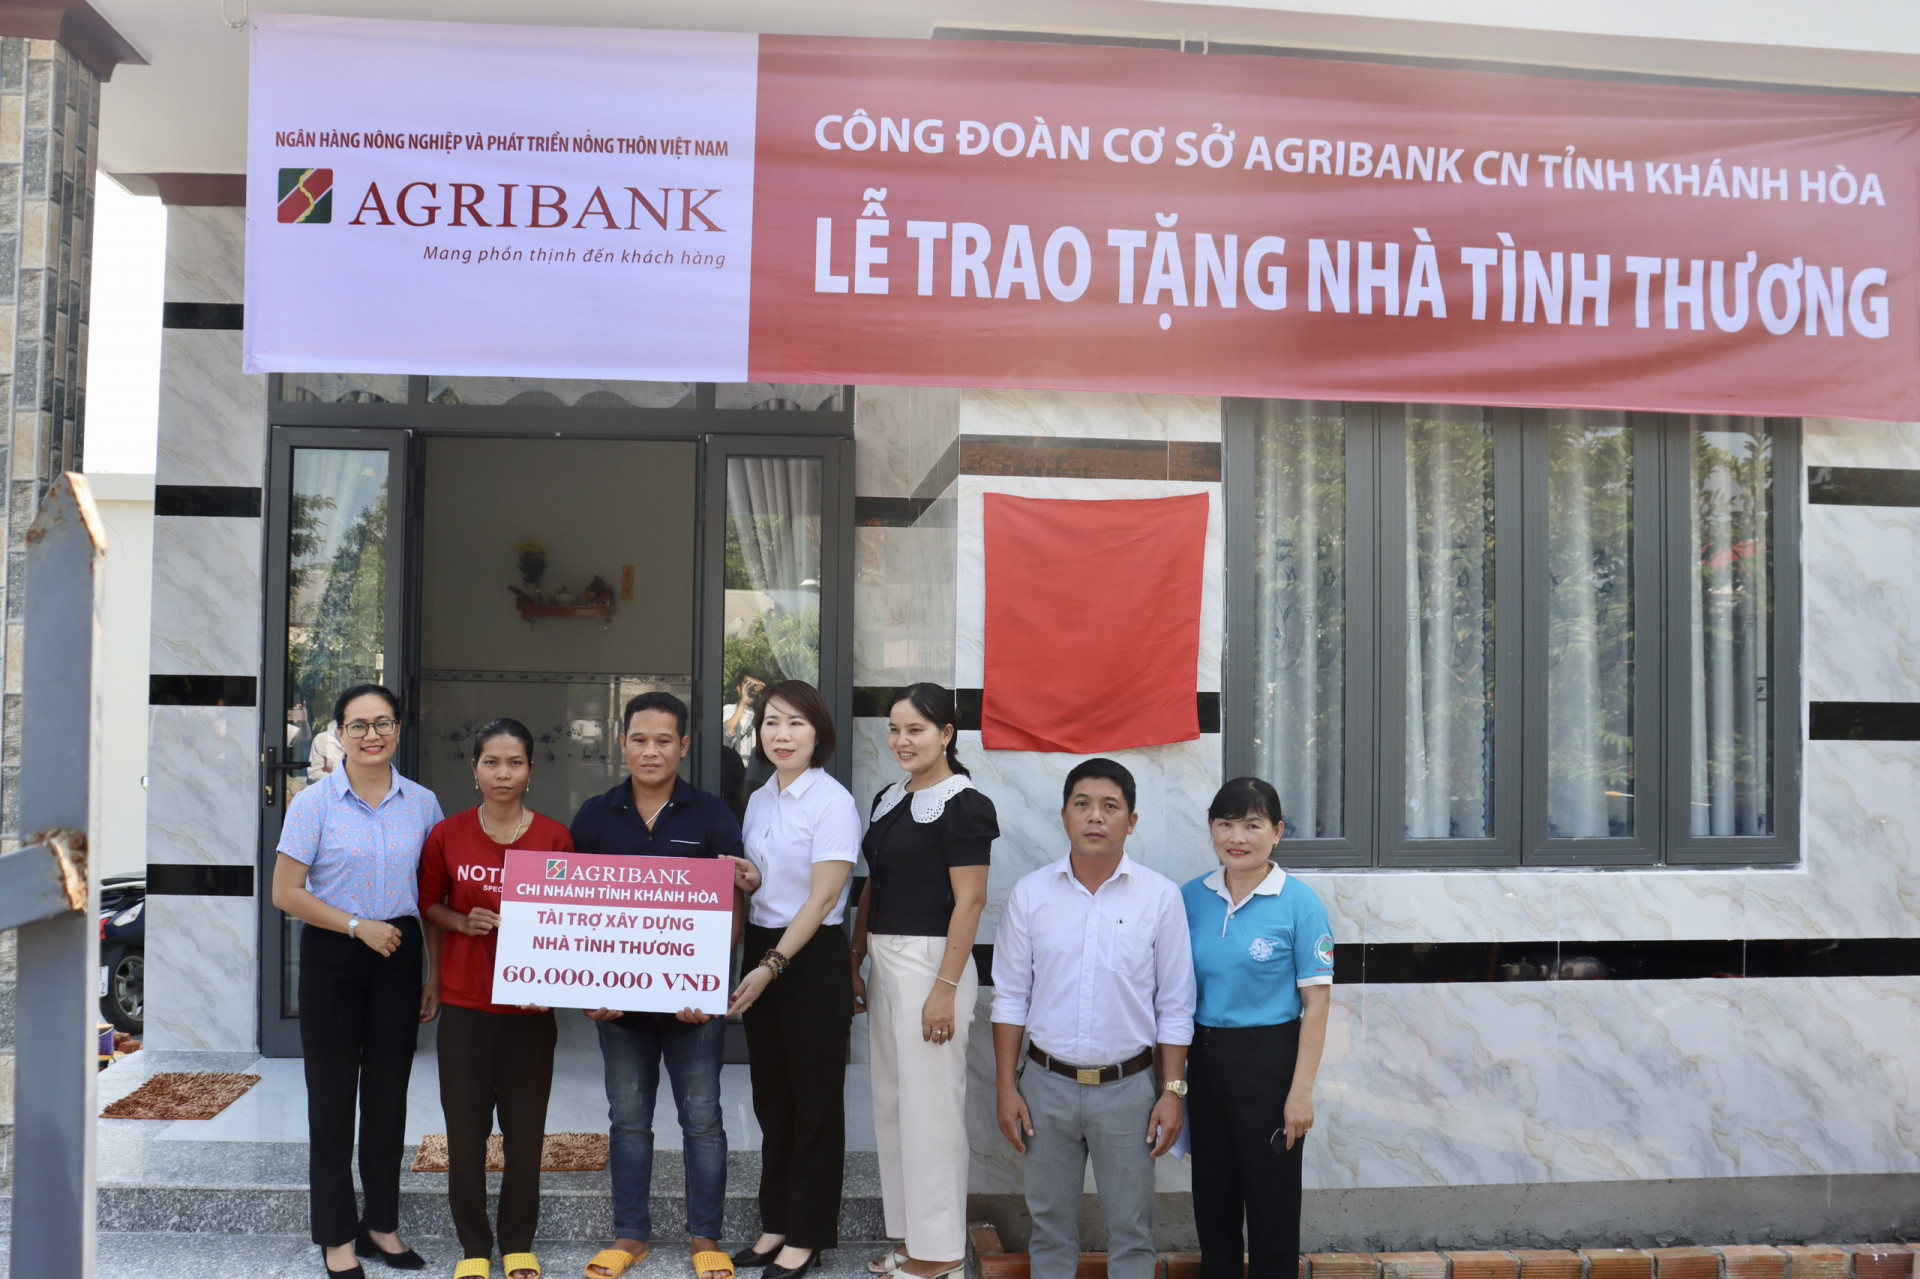 Khanh Hoa Women's Union and Agriculture and Rural Development Bank - Khanh Hoa Branch offer VND60 million to build house for disadvantaged member in Khanh Vinh Town